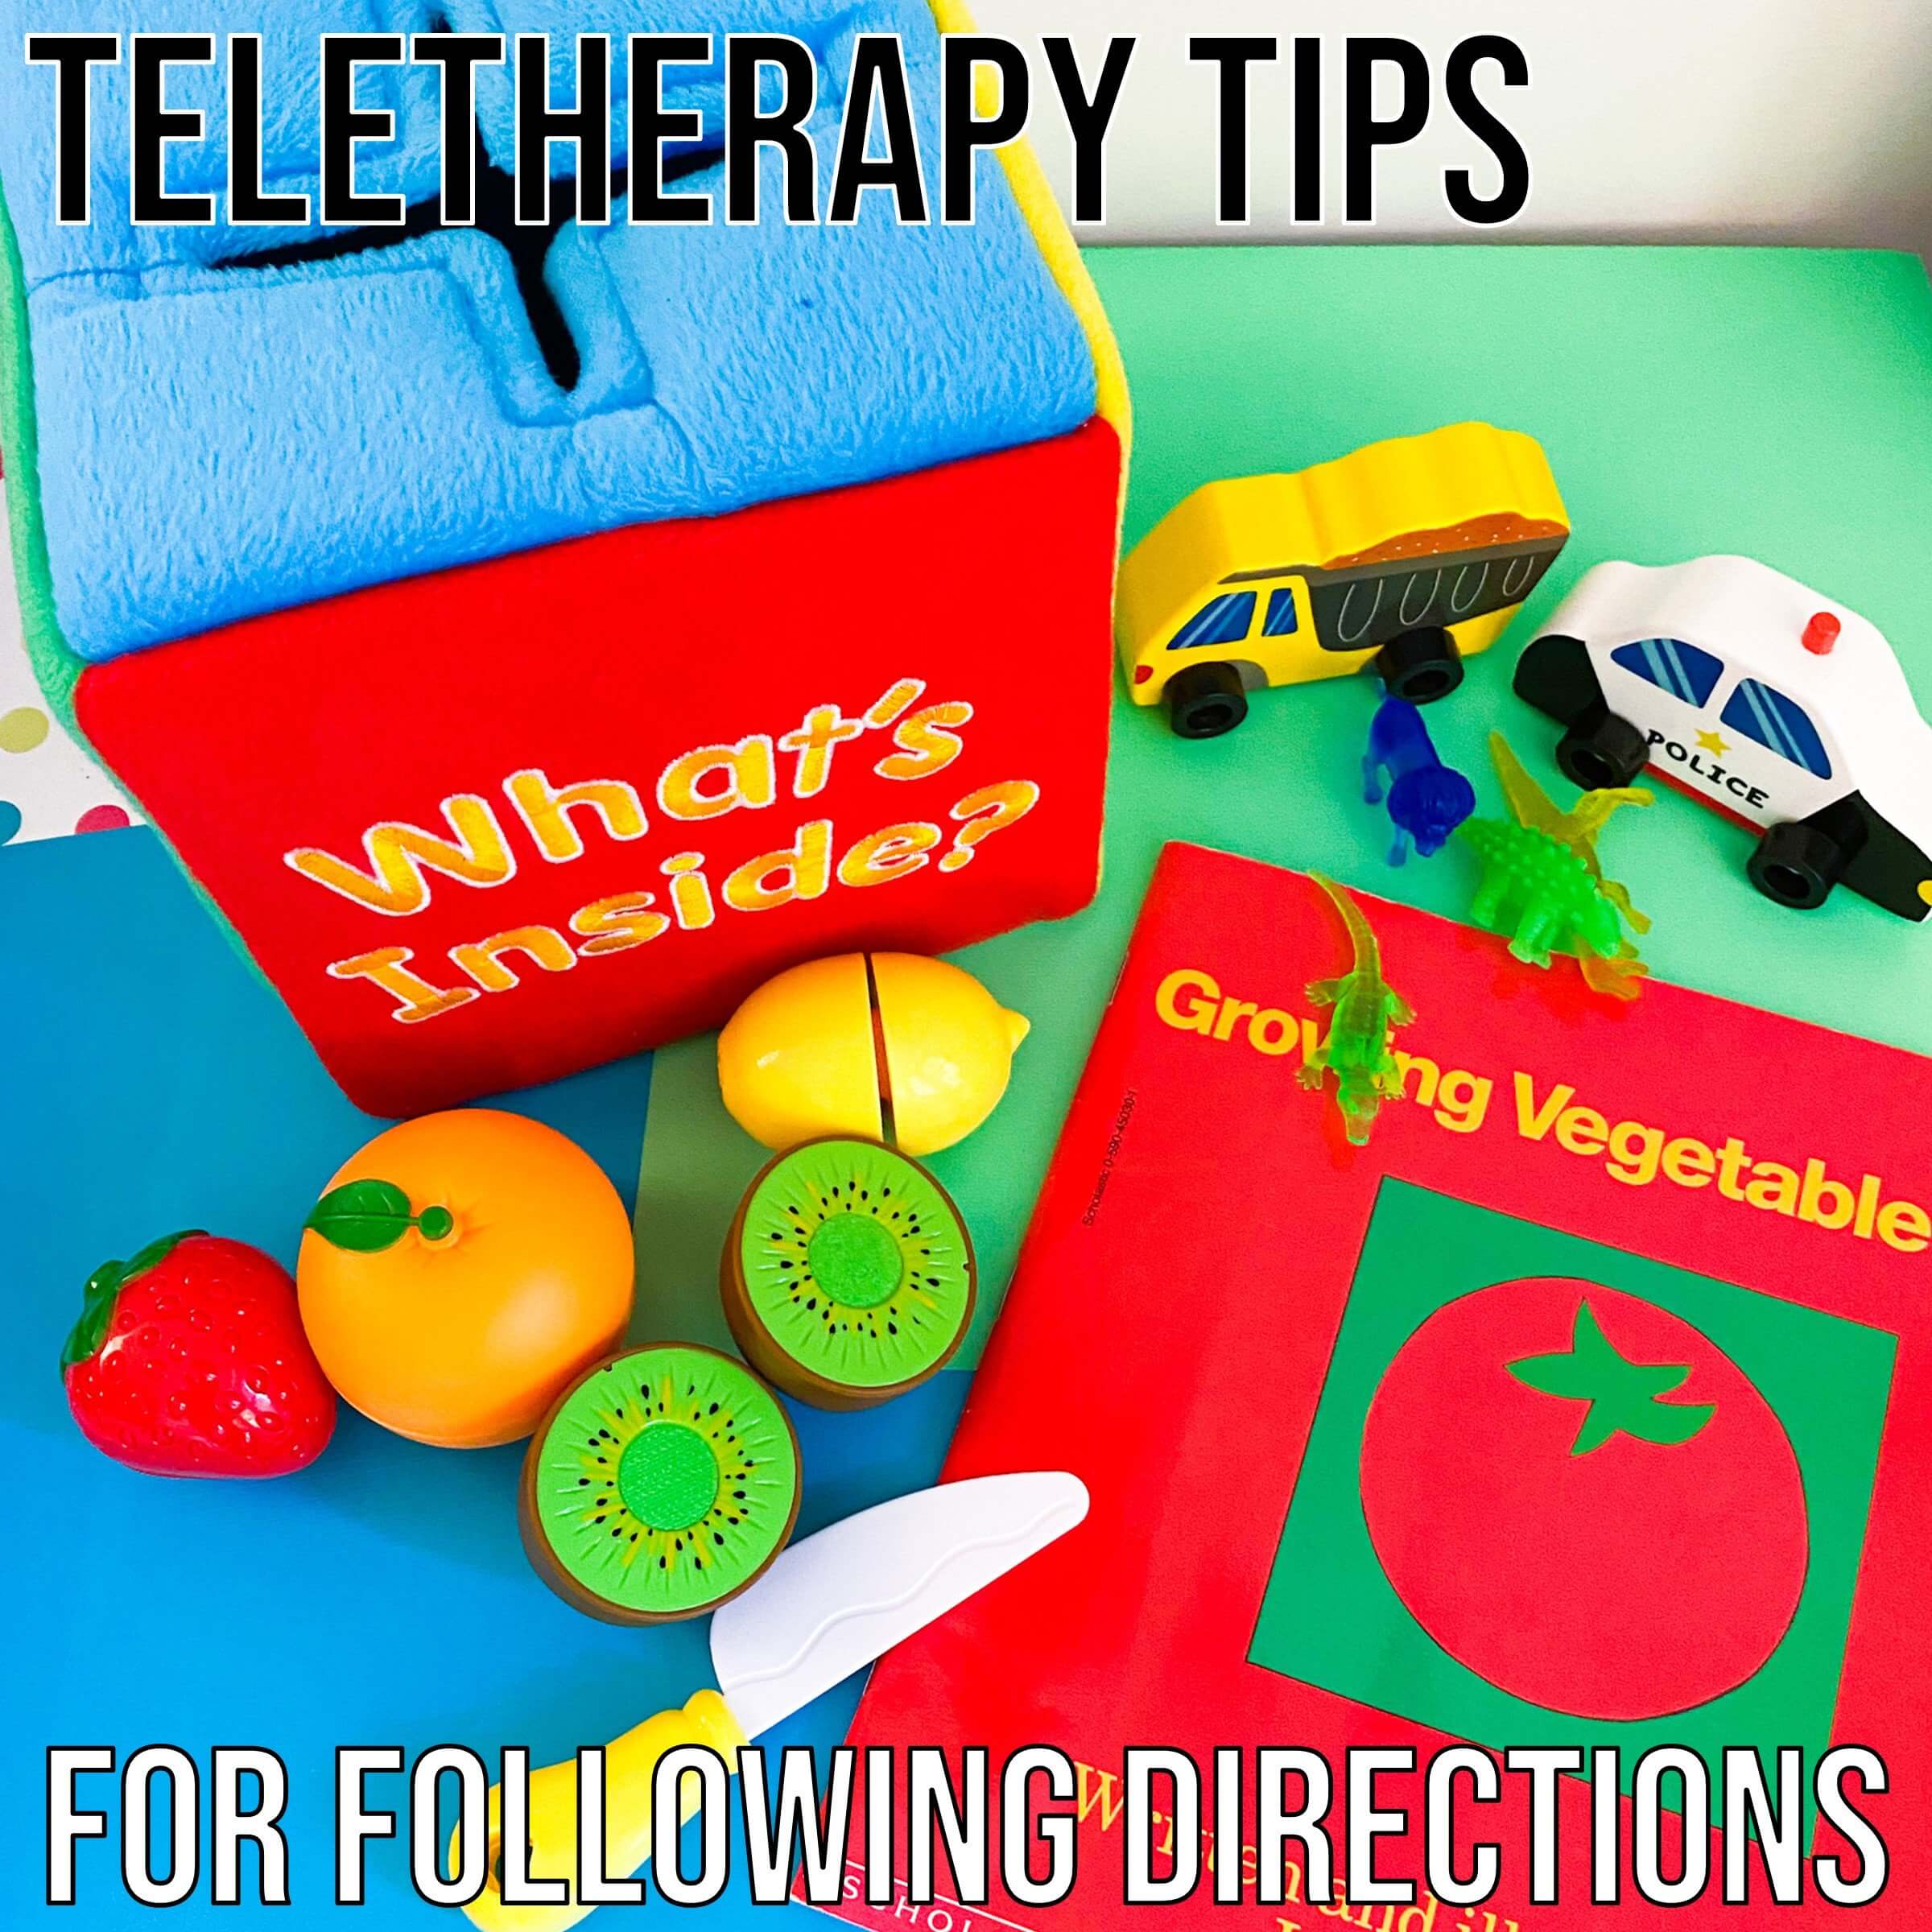 Following Directions in Teletherapy